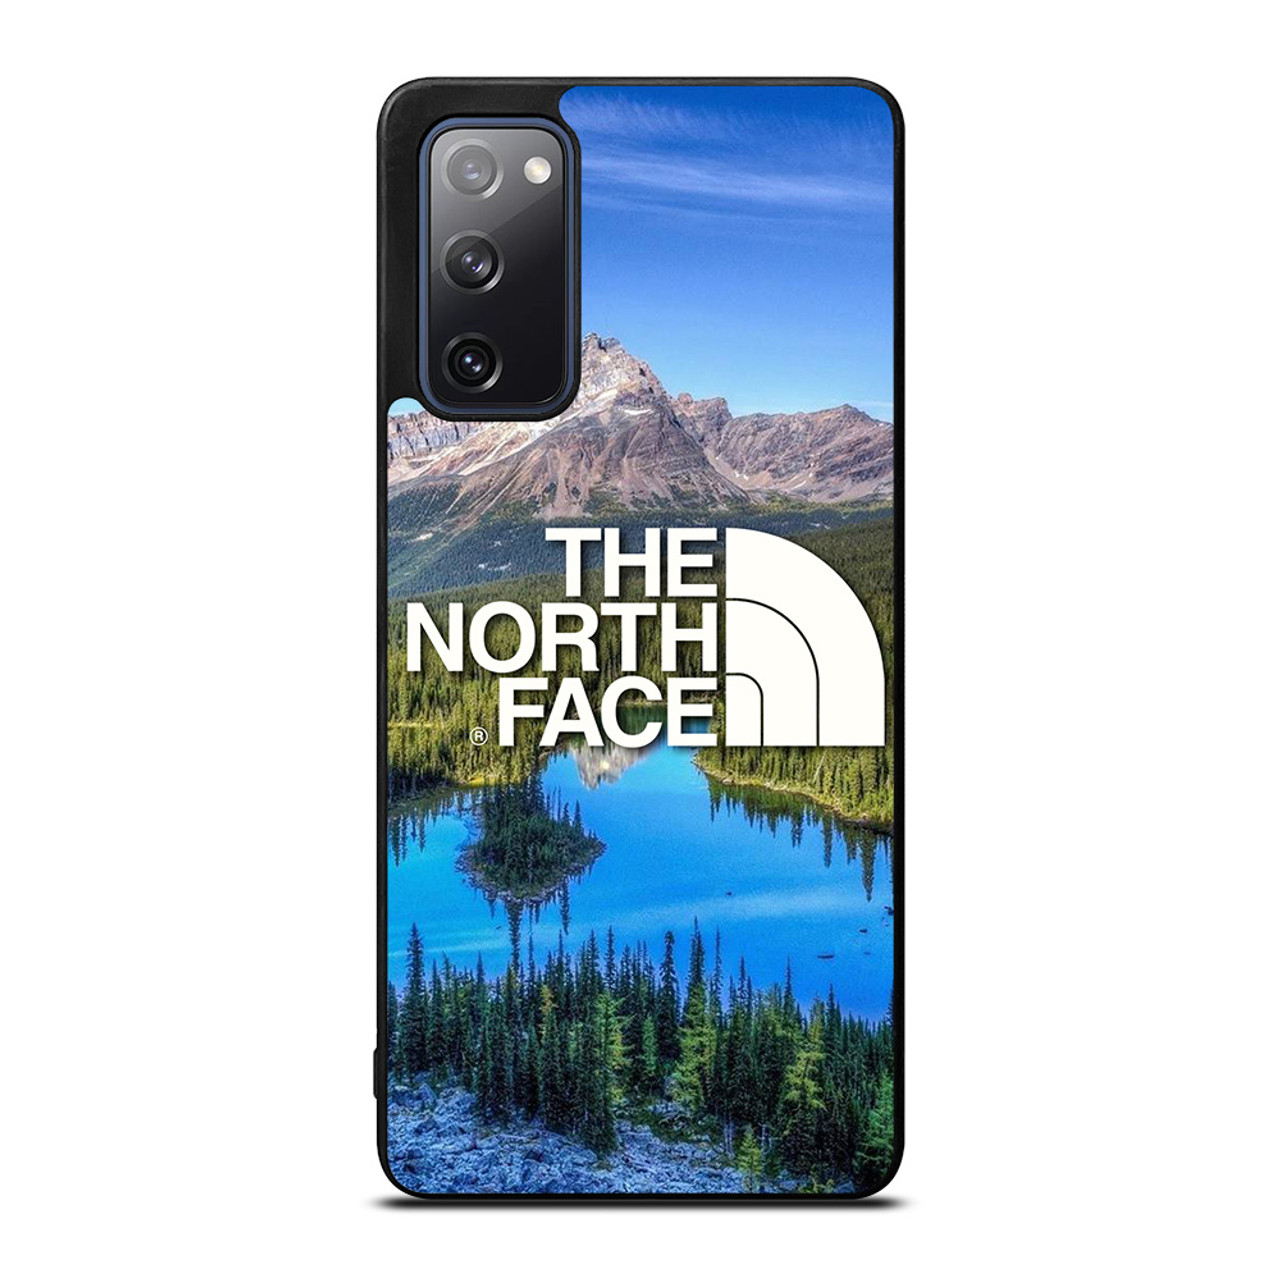 THE NORTH FACE ROCKY MOUNTAINS Samsung Galaxy S20 FE Case Cover